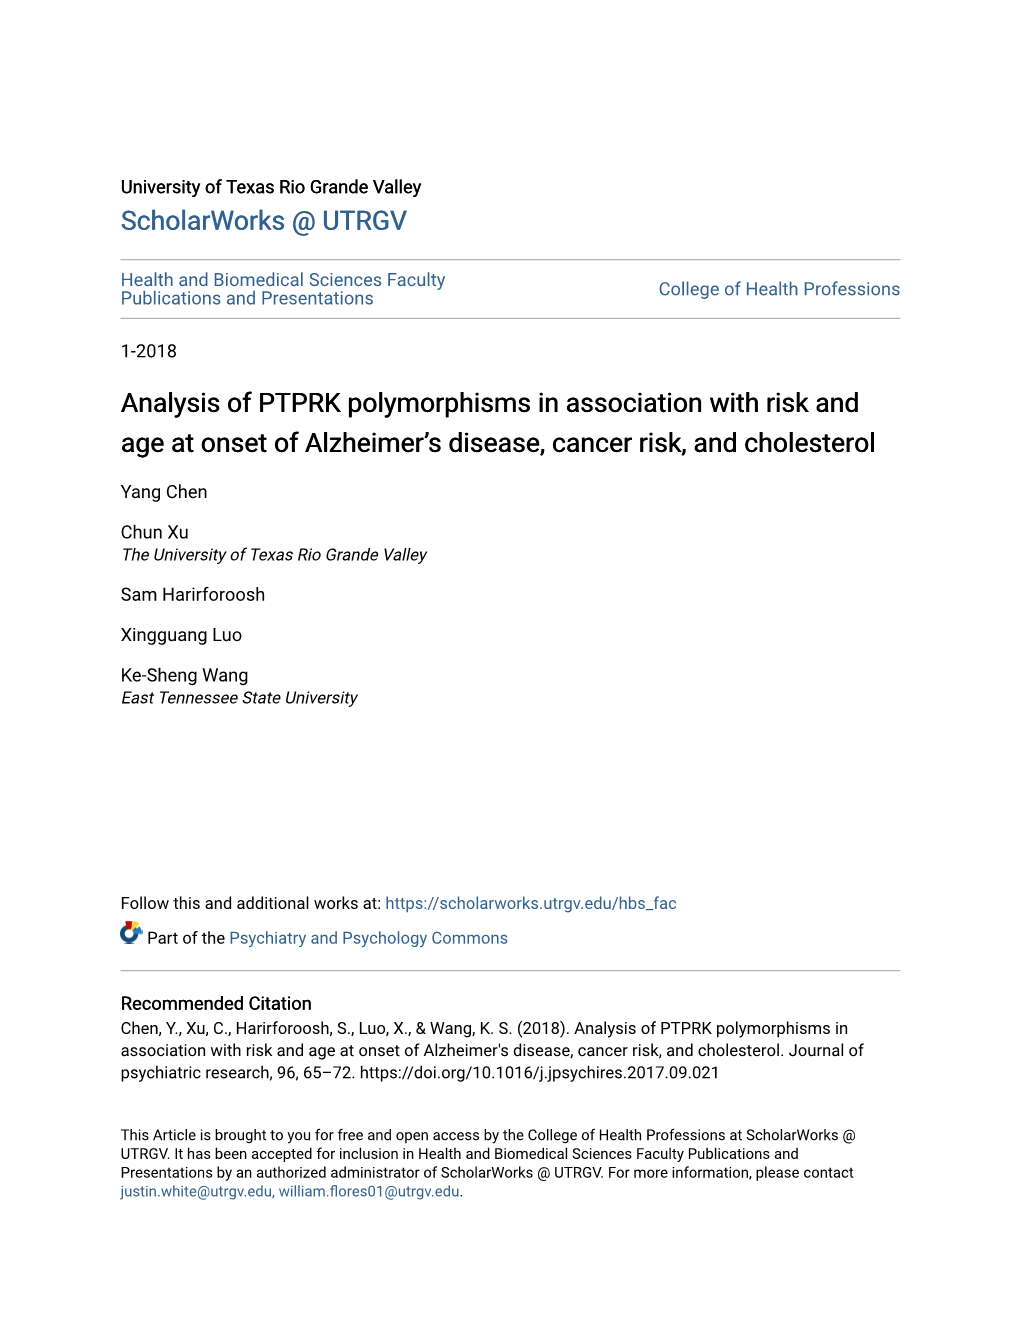 Analysis of PTPRK Polymorphisms in Association with Risk and Age at Onset of Alzheimer's Disease, Cancer Risk, and Cholesterol